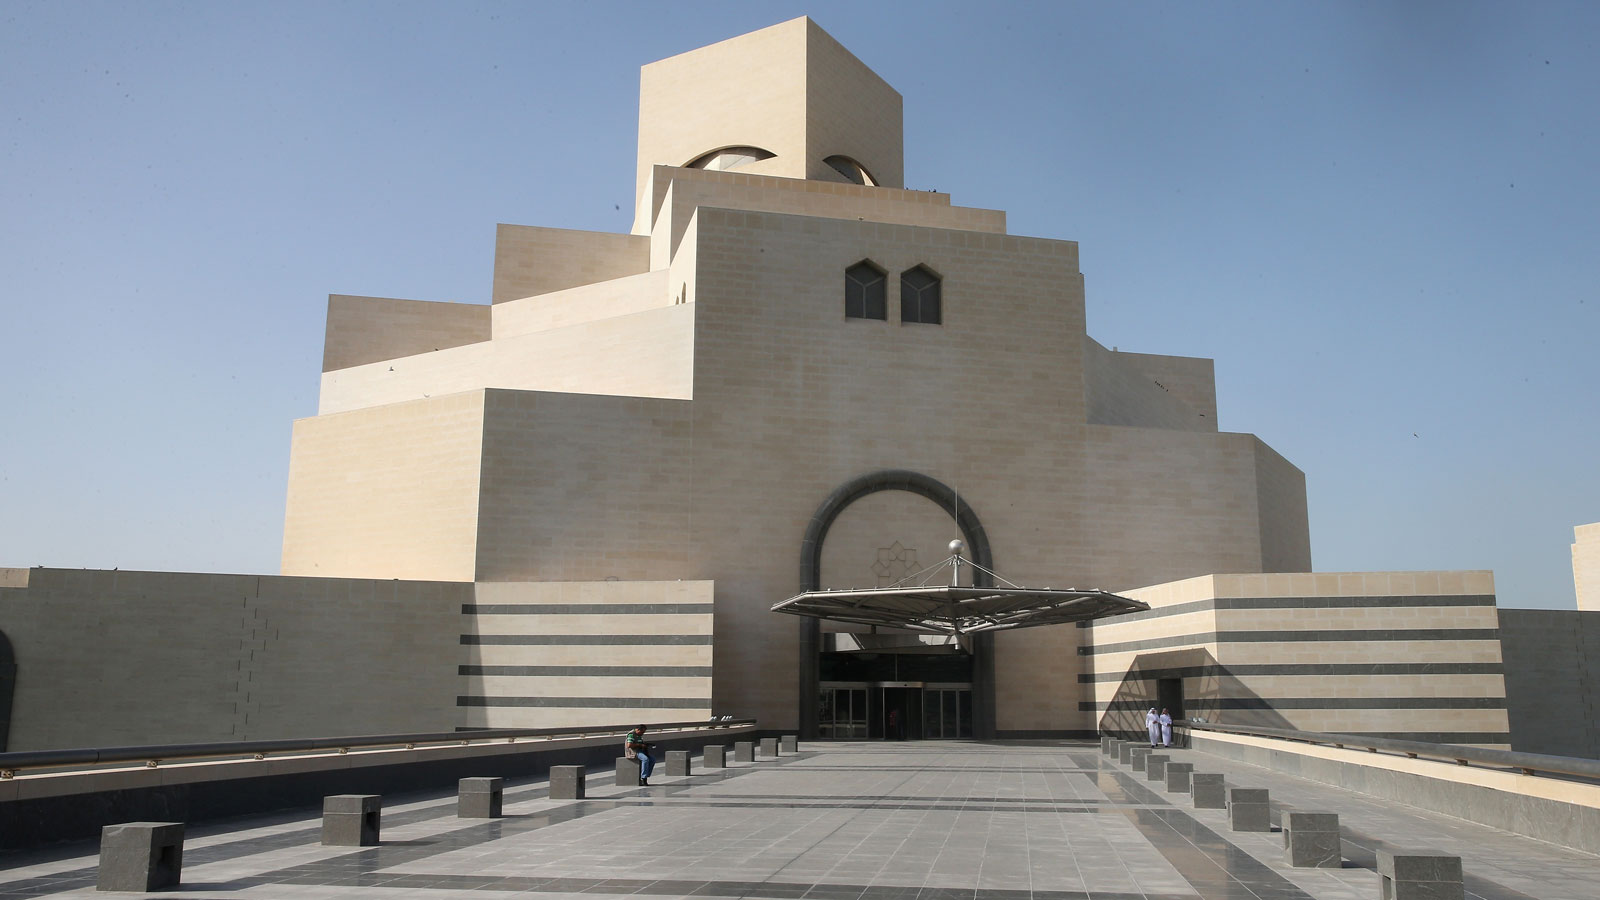 10 Intriguing Facts About Museum Of Islamic Art (Doha) - Facts.net